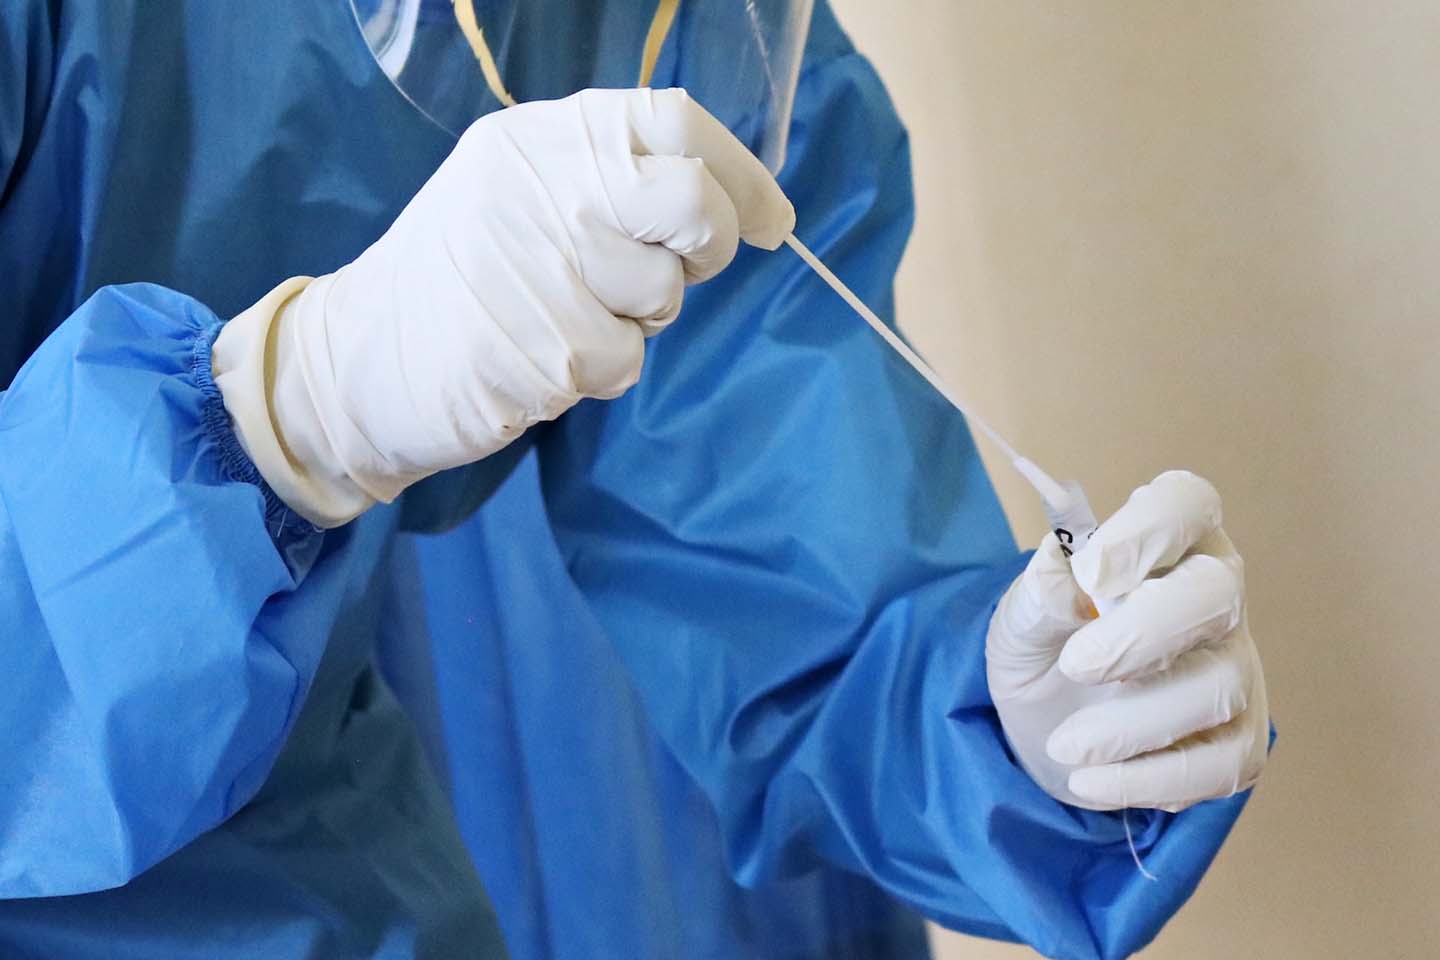 a medical professional wearing full personal protective equipment while collecting samples from a sterile tube